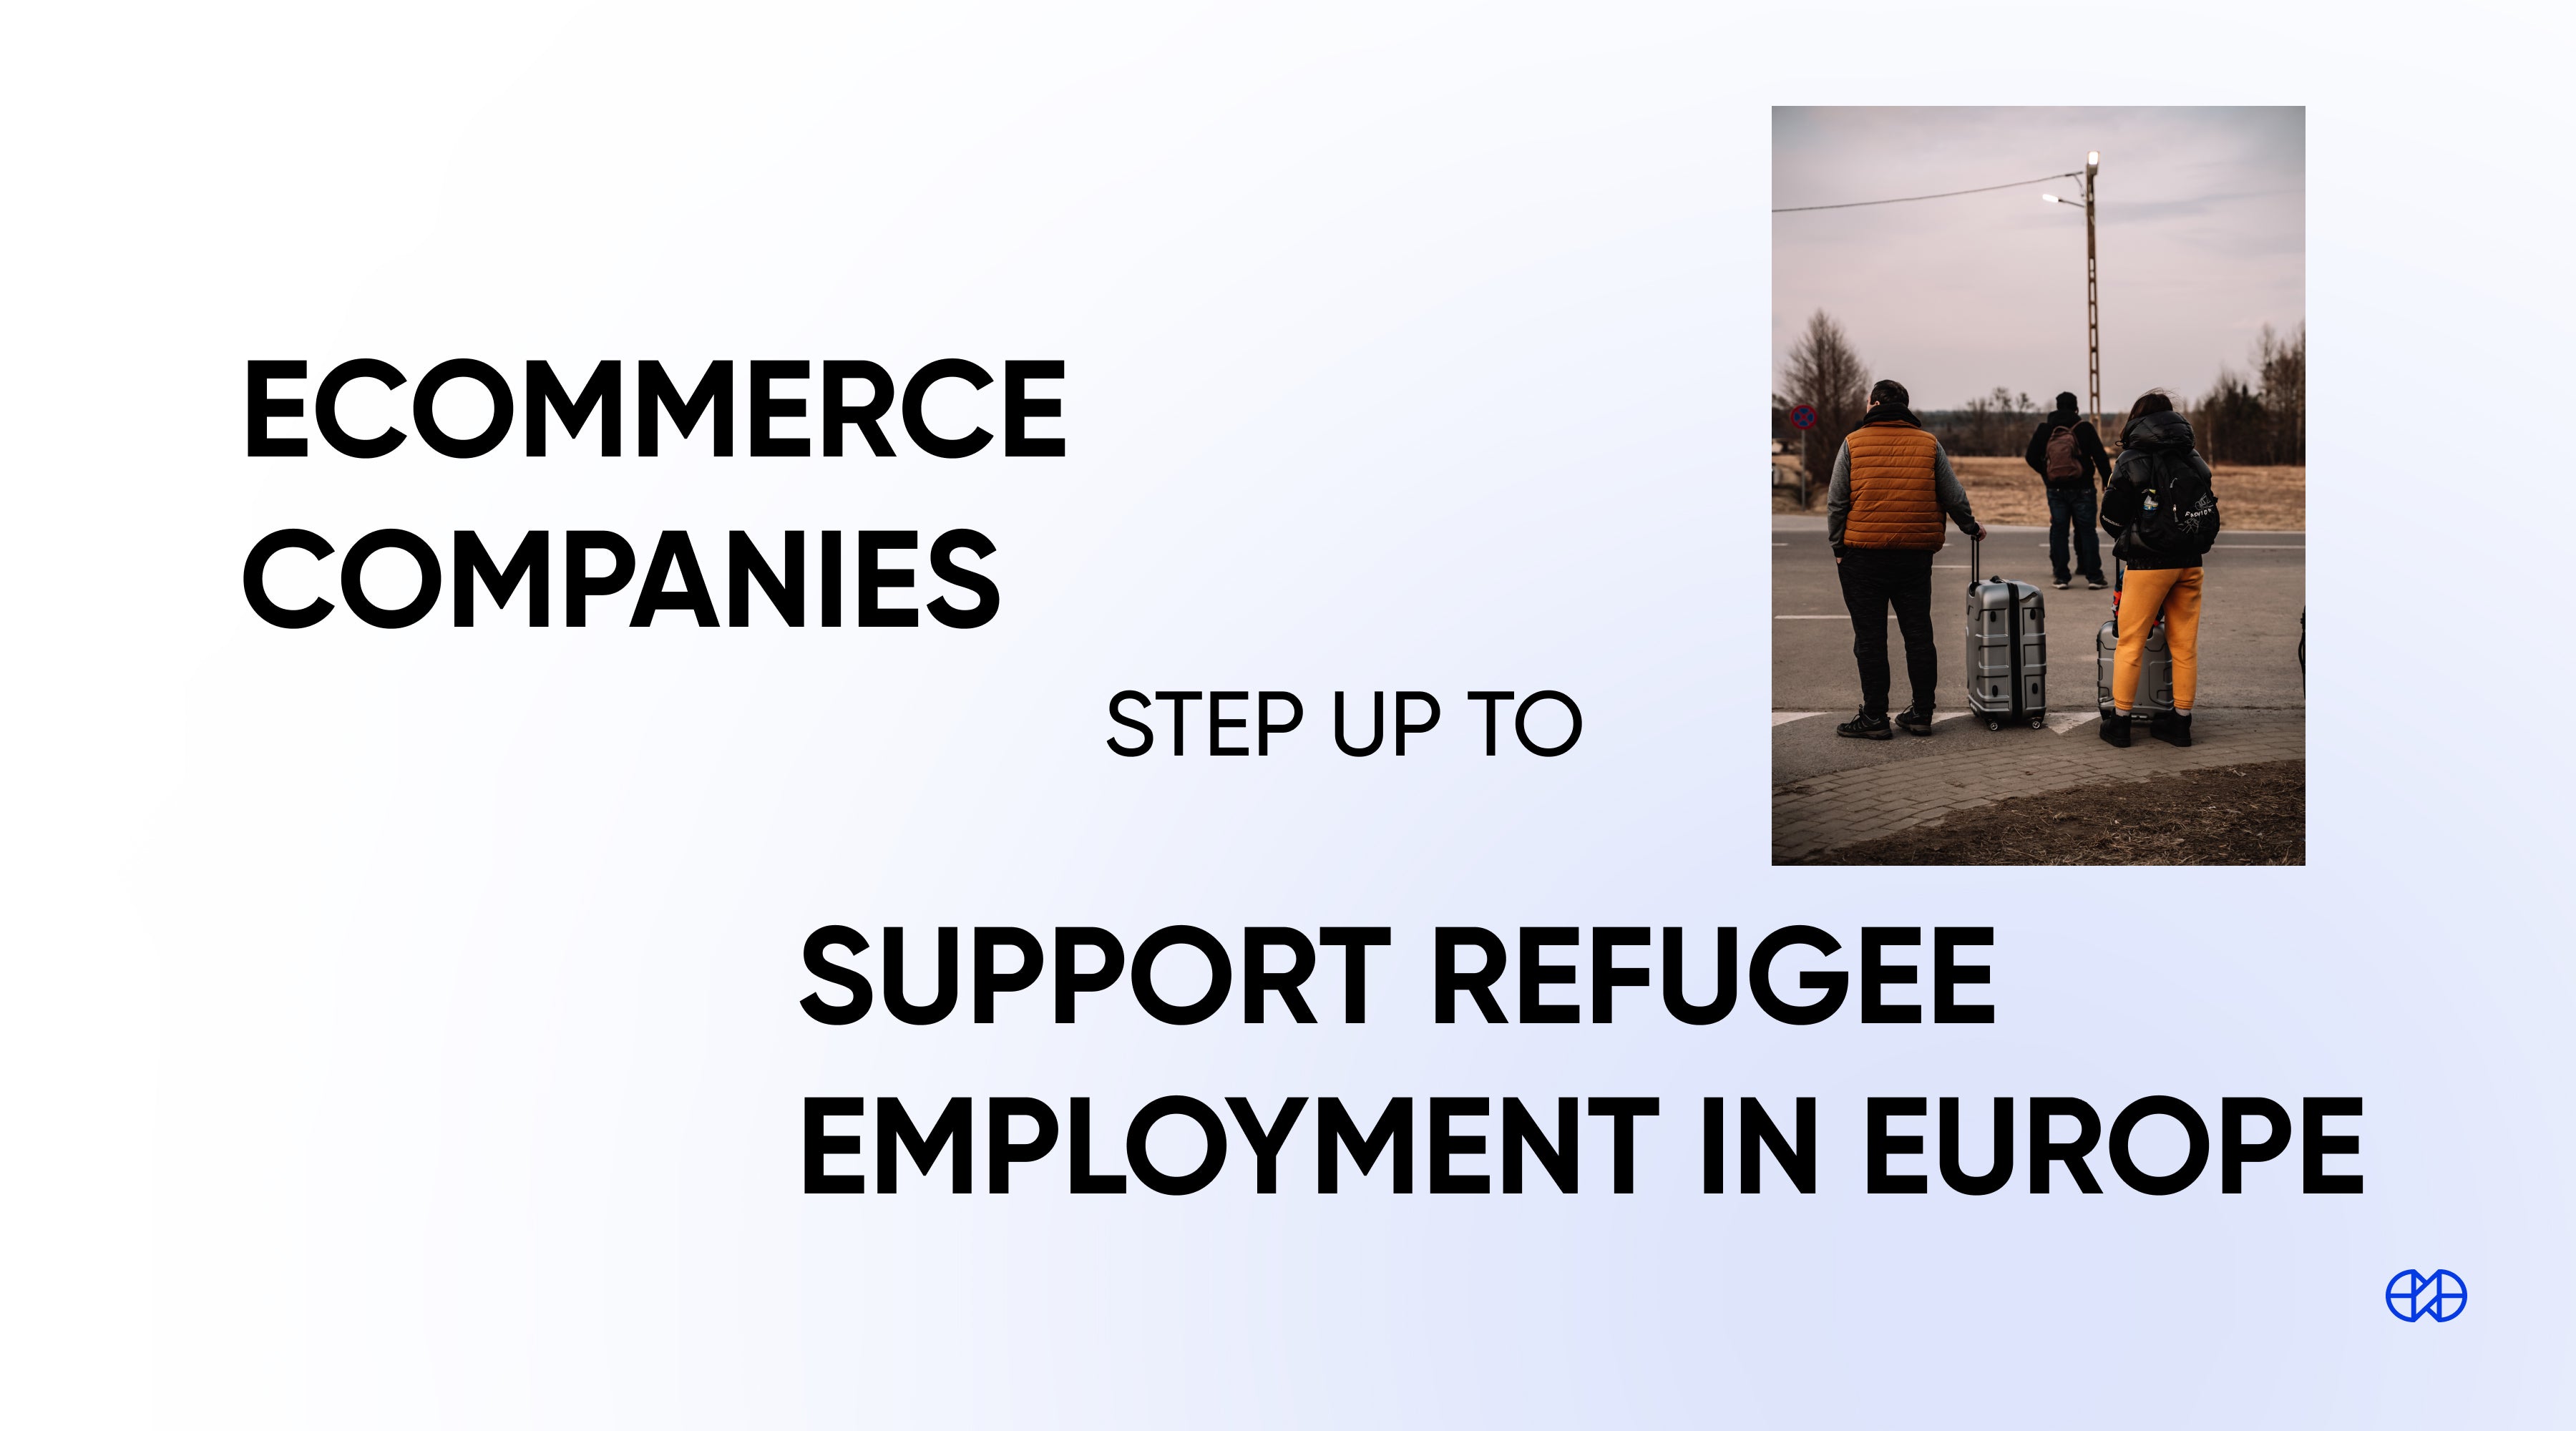 Ecommerce companies step up to support refugee employment in Europe